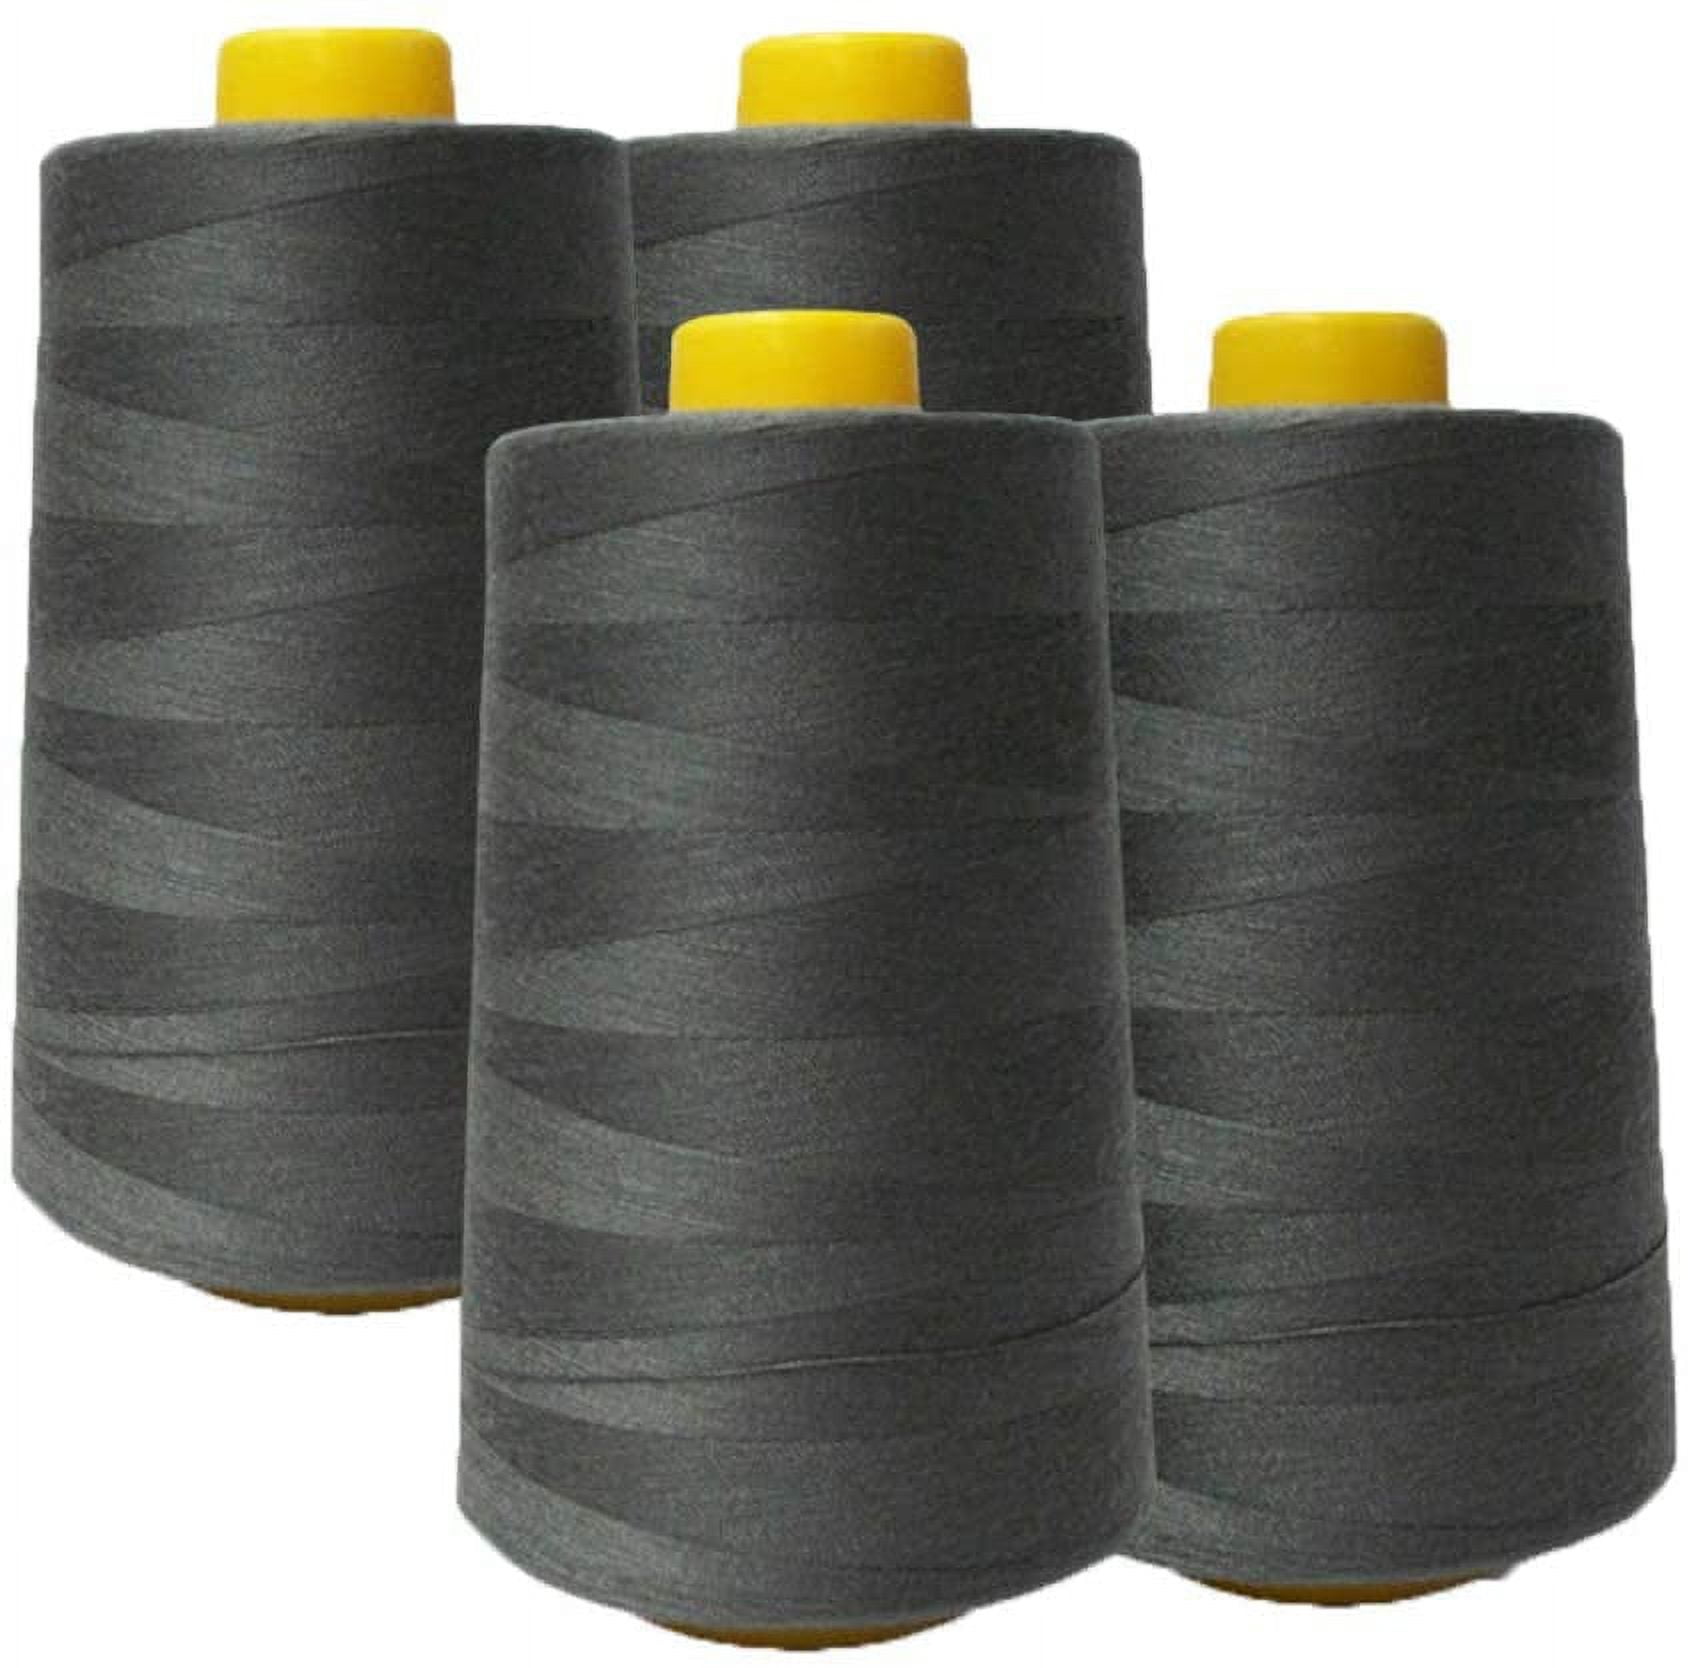 4-pack All Purpose Sewing Thread Cones 6000 Yards Each for Sewing, Serger  Machines, Quilting, Overlock, Merrow and Hand Embroidery -  Norway